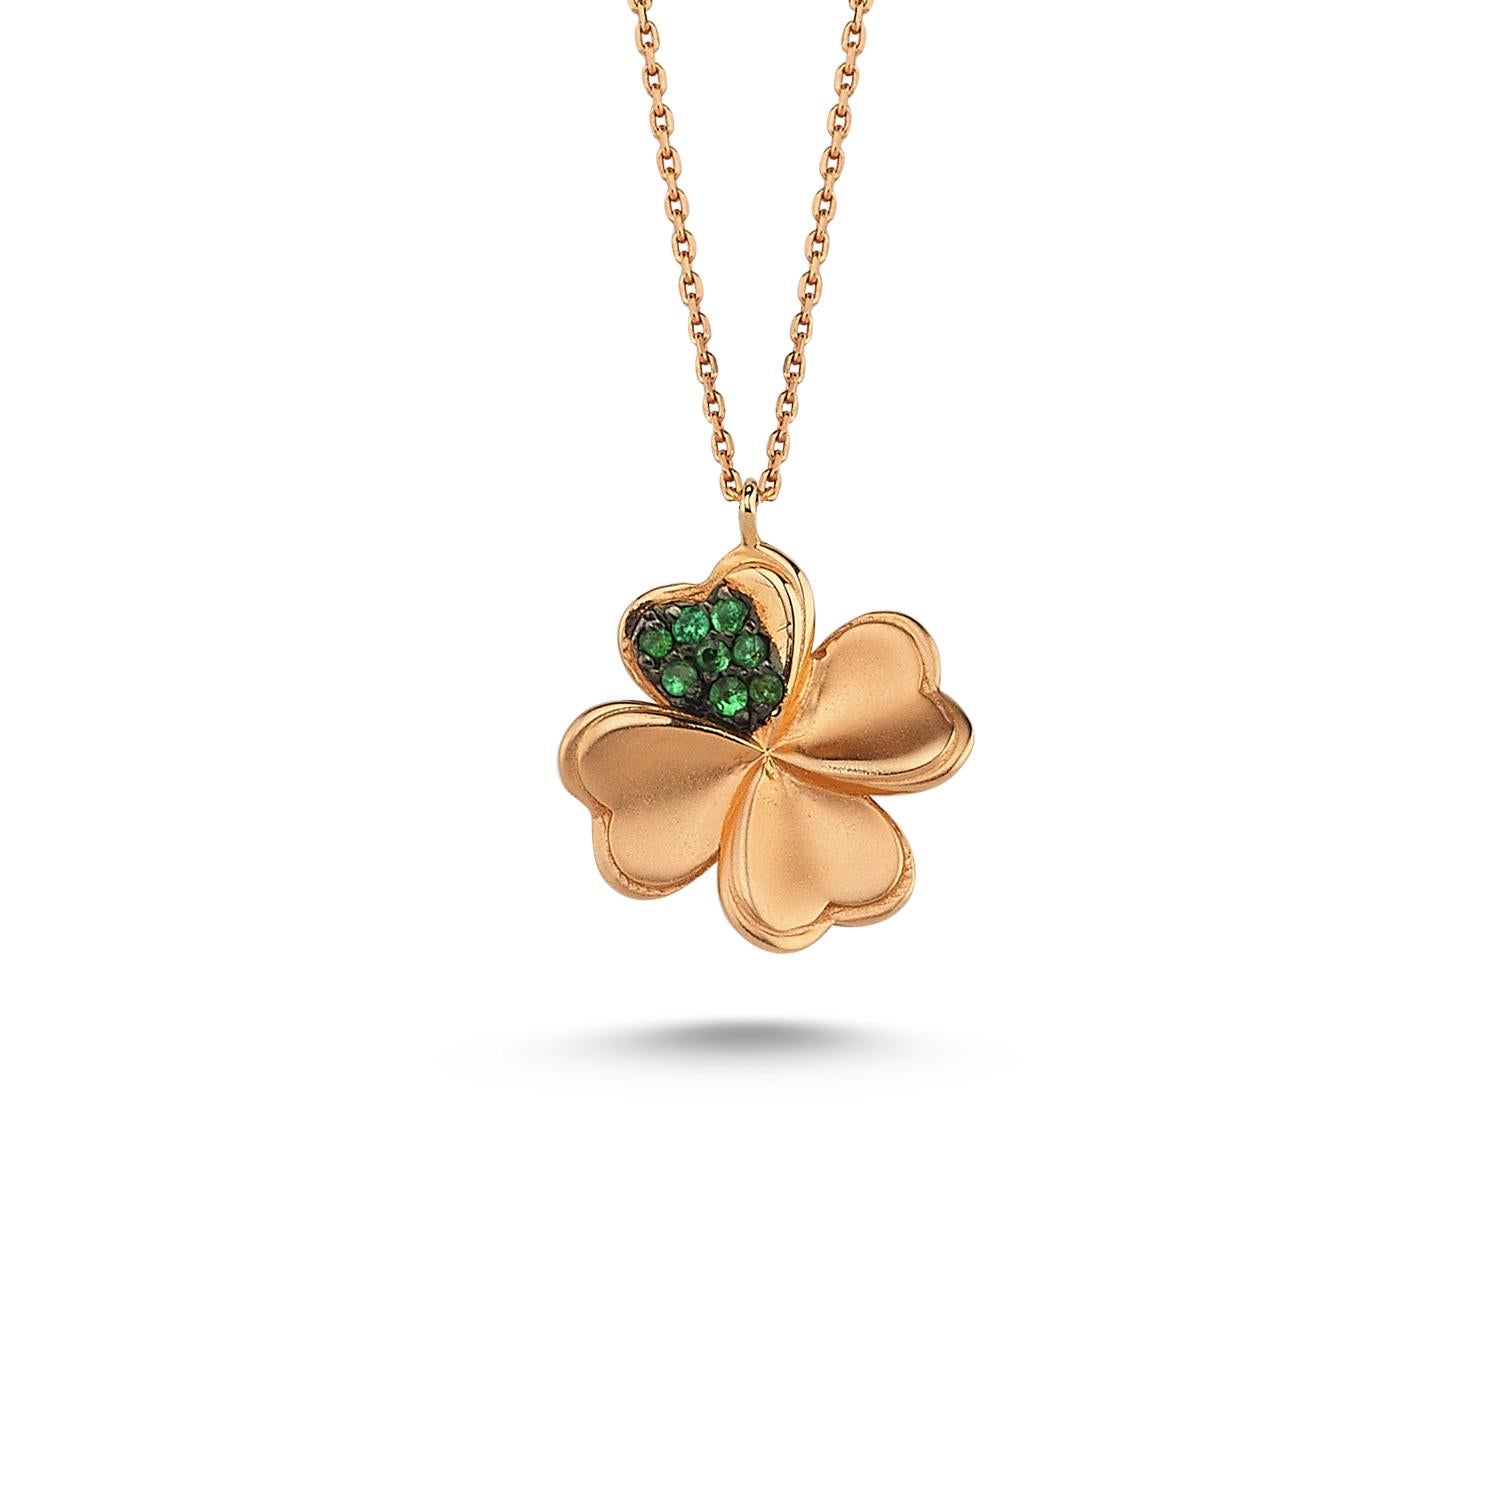 Clover lucky necklace in 14k rose gold with 0.03ct tsavorite by Selda Jewellery

Additional Information:-
Collection: Art of giving collection
14K Rose gold
0.03ct Tsavori̇te
Chain length 42cm